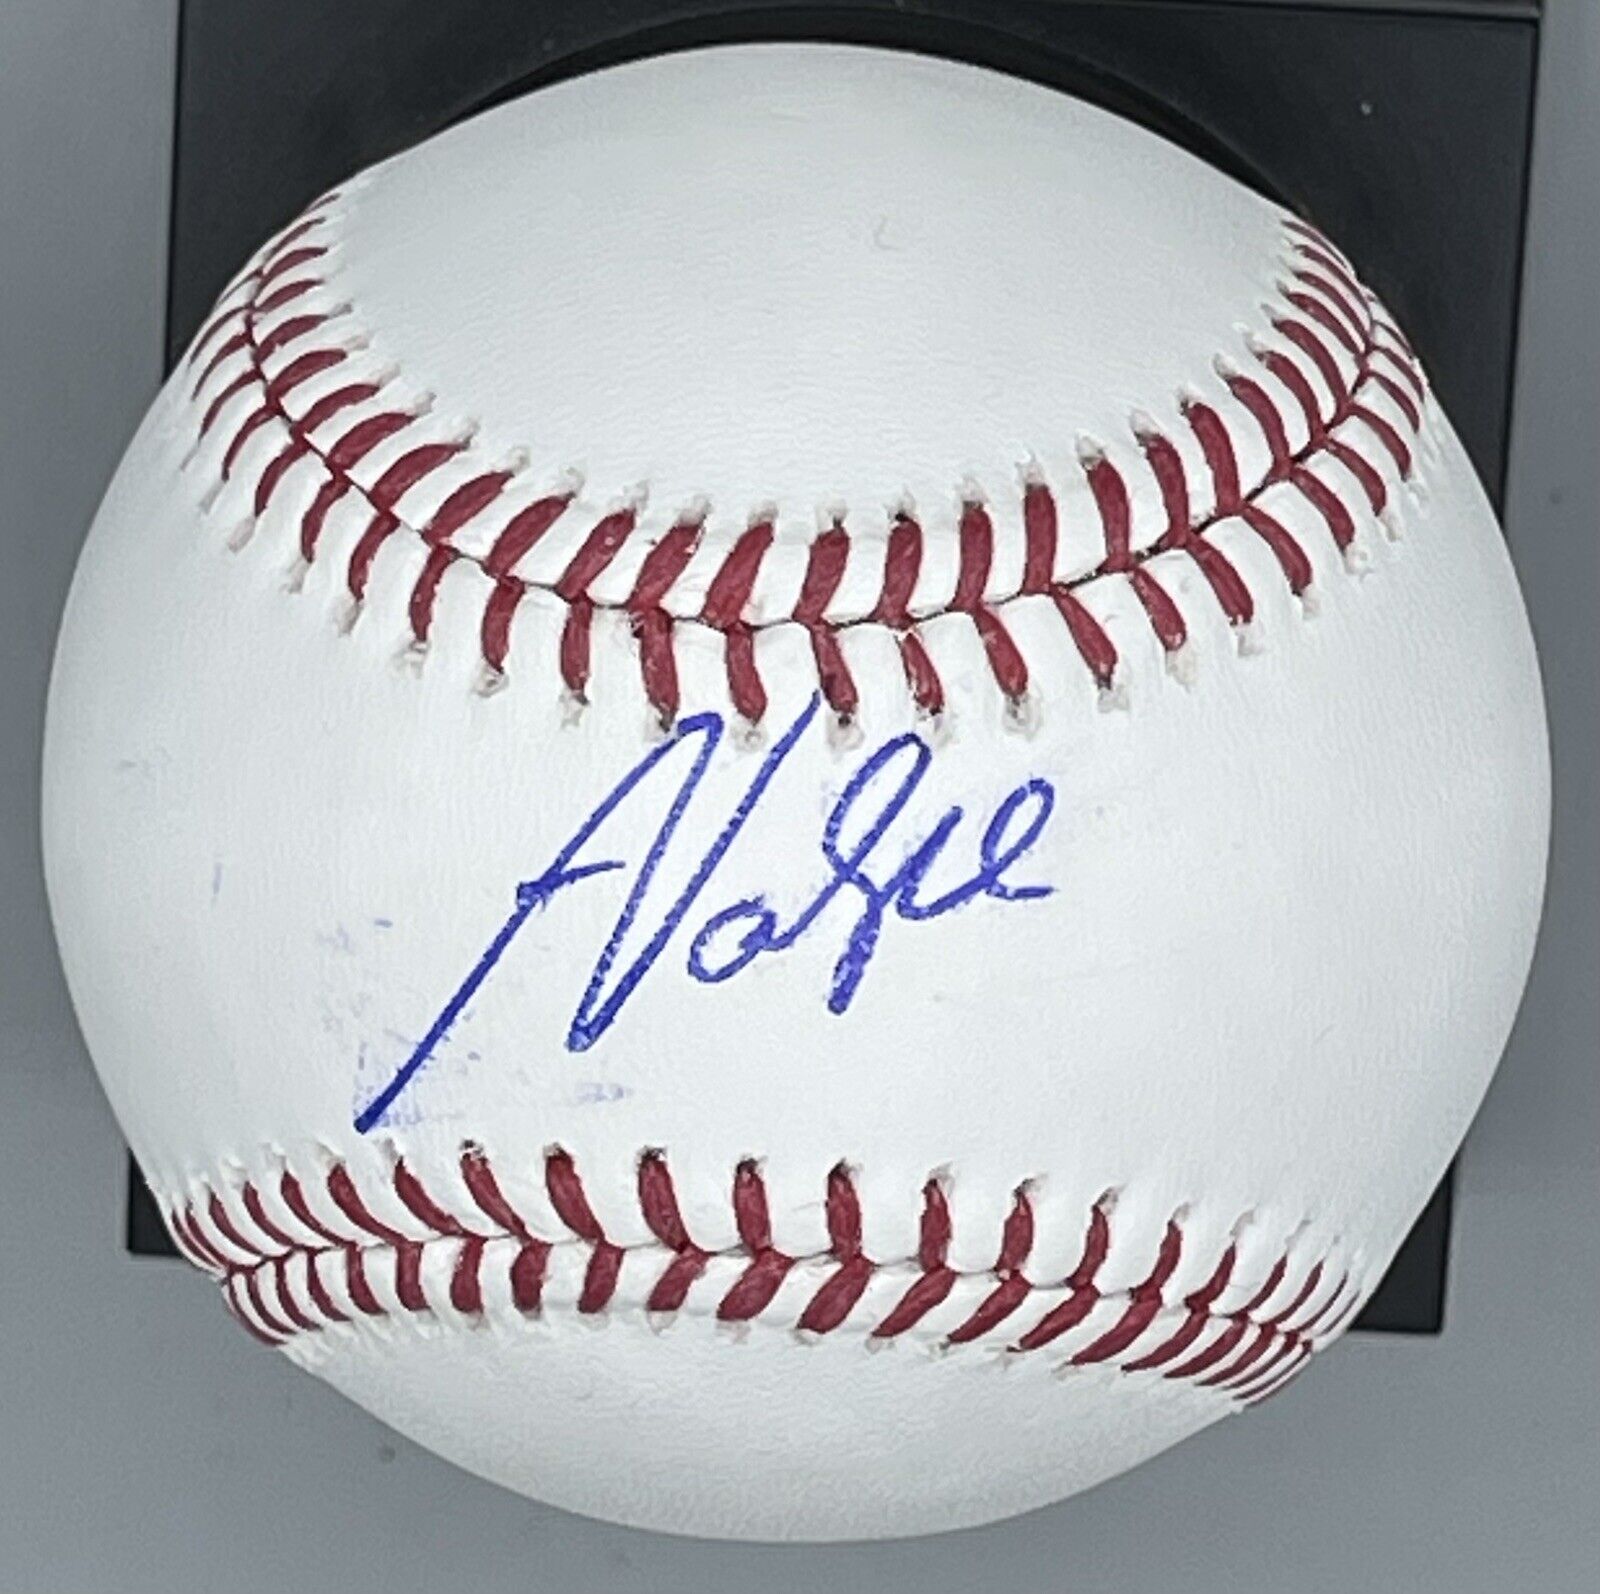 ANTHONY VOLPE SIGNED AUTOGRAPHED ROMLB BASEBALL New York Yankees PSA/DNA